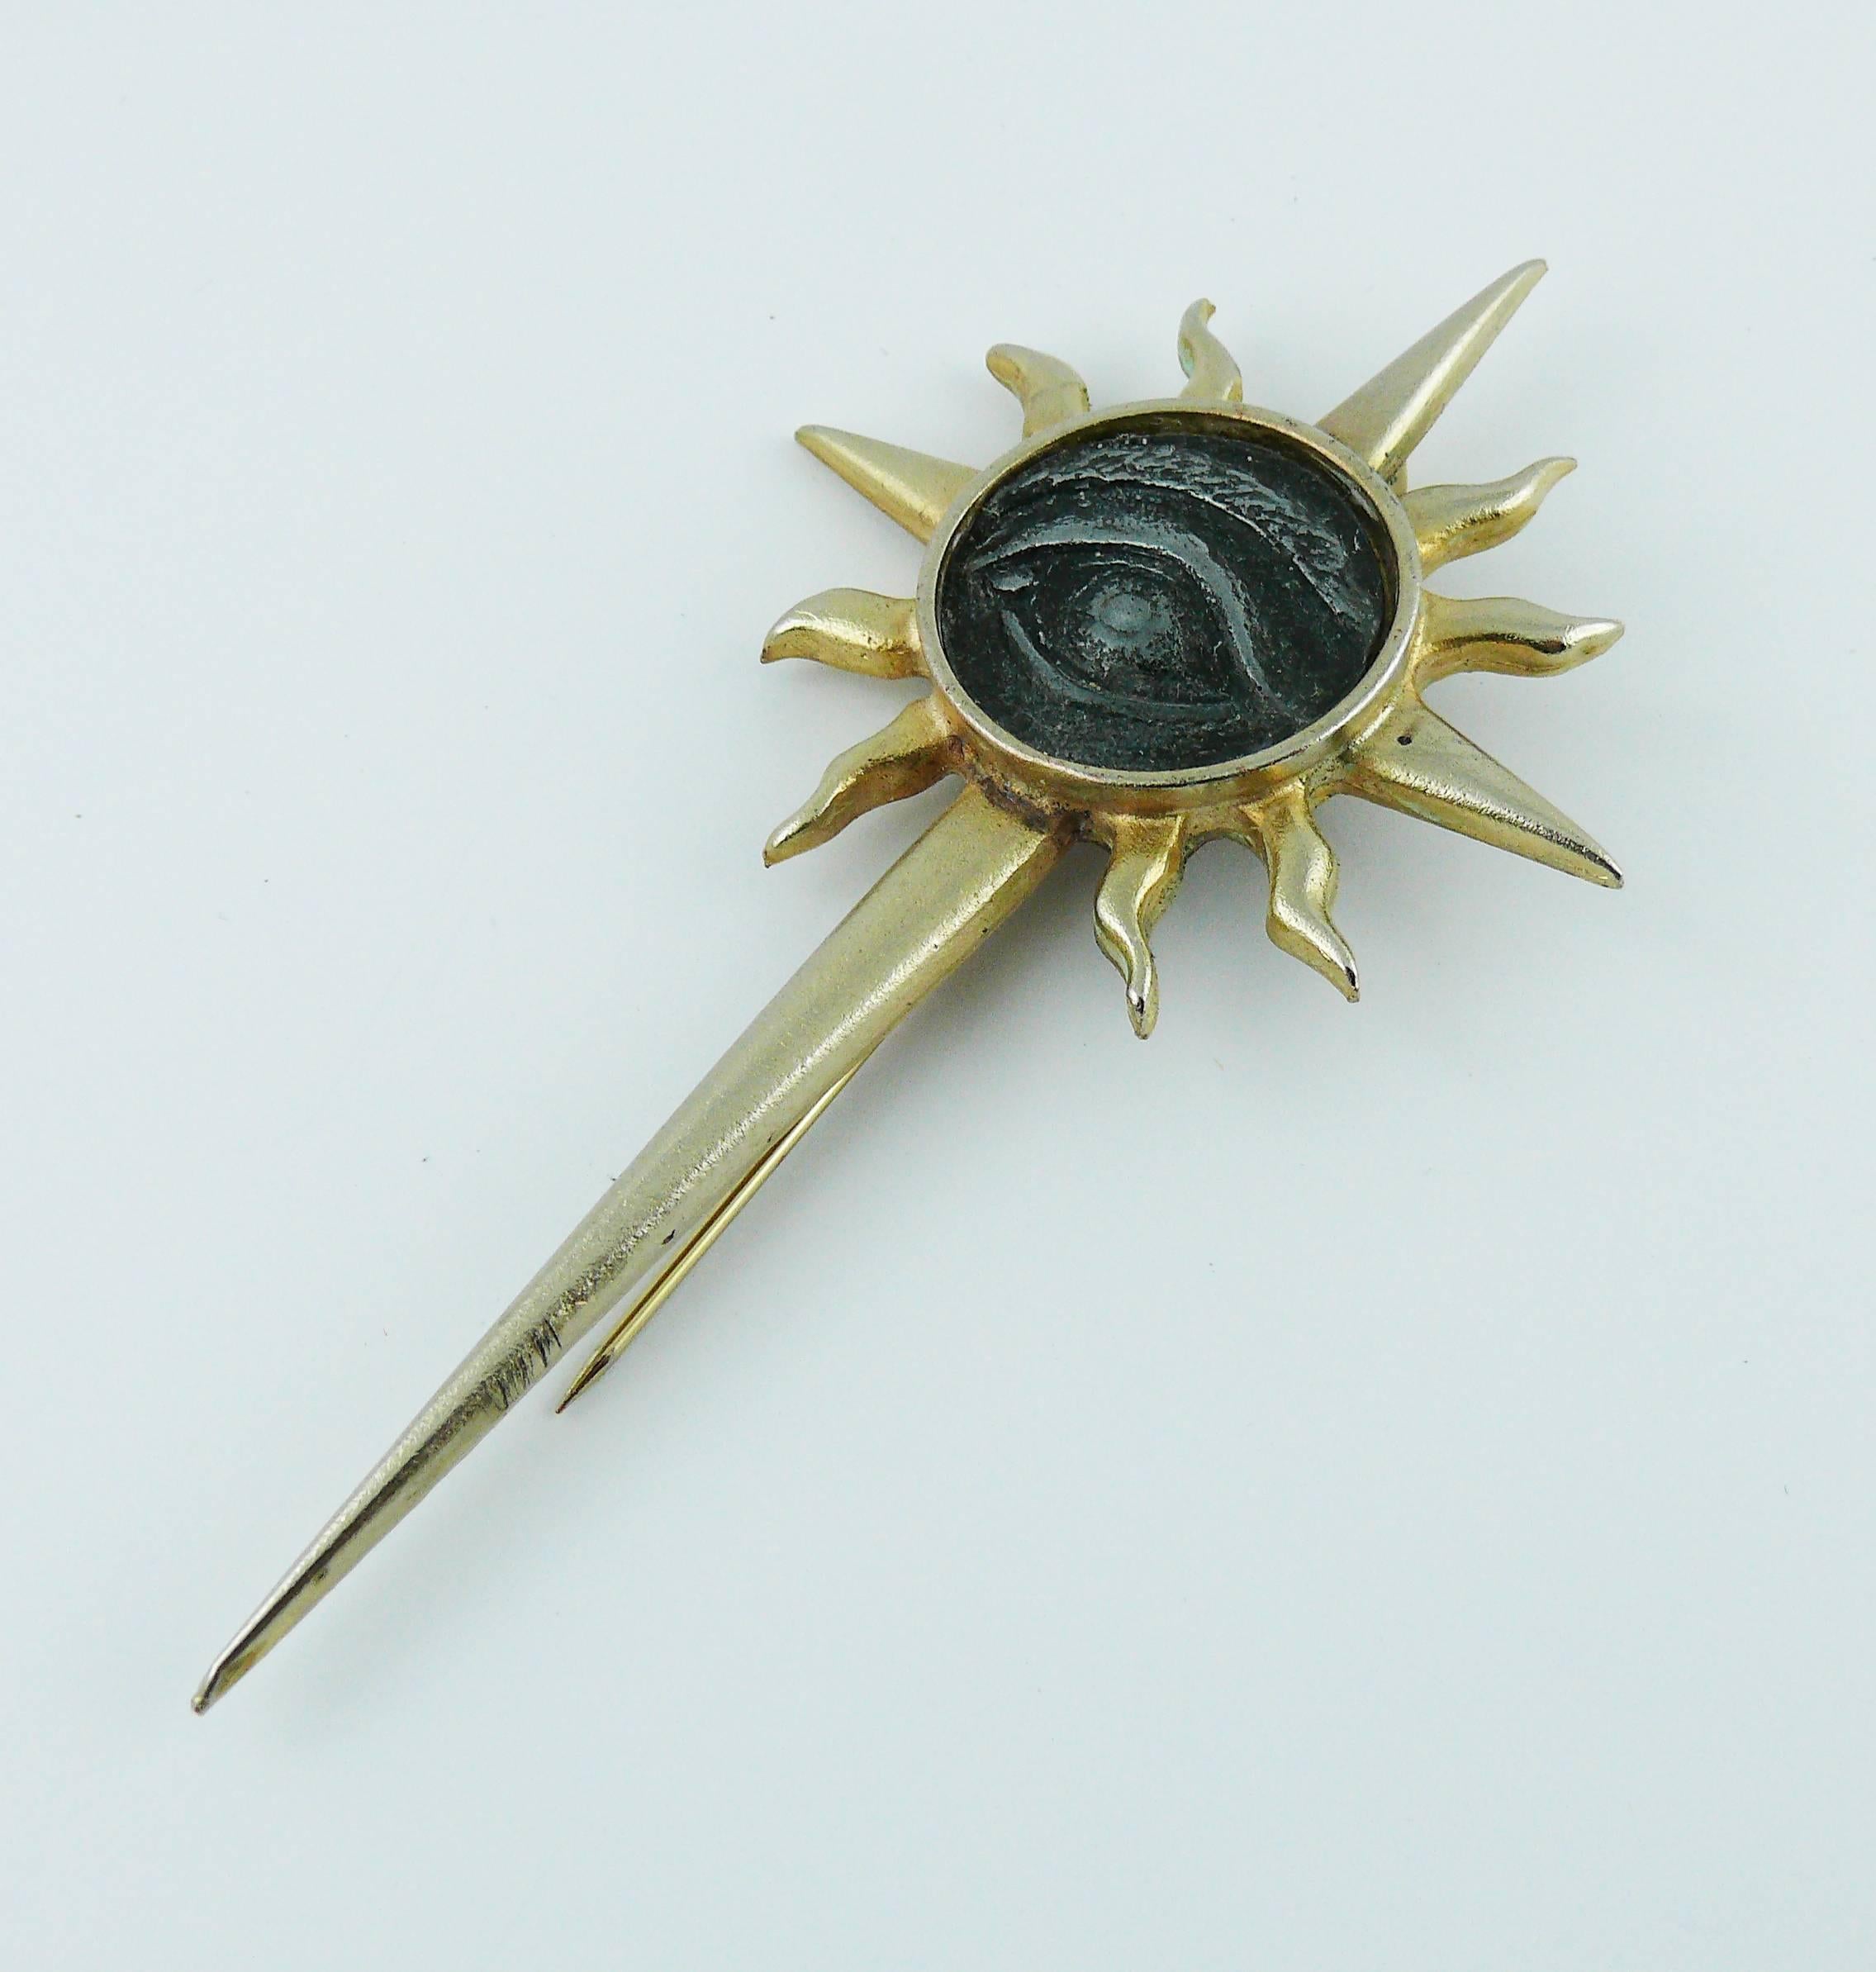 JEAN PAUL GAULTIER vintage rare pale gold toned brooch featuring a radiant sun and a distressed black Egyptian eye coin insert.

Embossed JEAN PAUL GAULTIER.

Indicative measurements : height approx. 11 cm (4.33 inches) / max. width approx. 5.5 cm